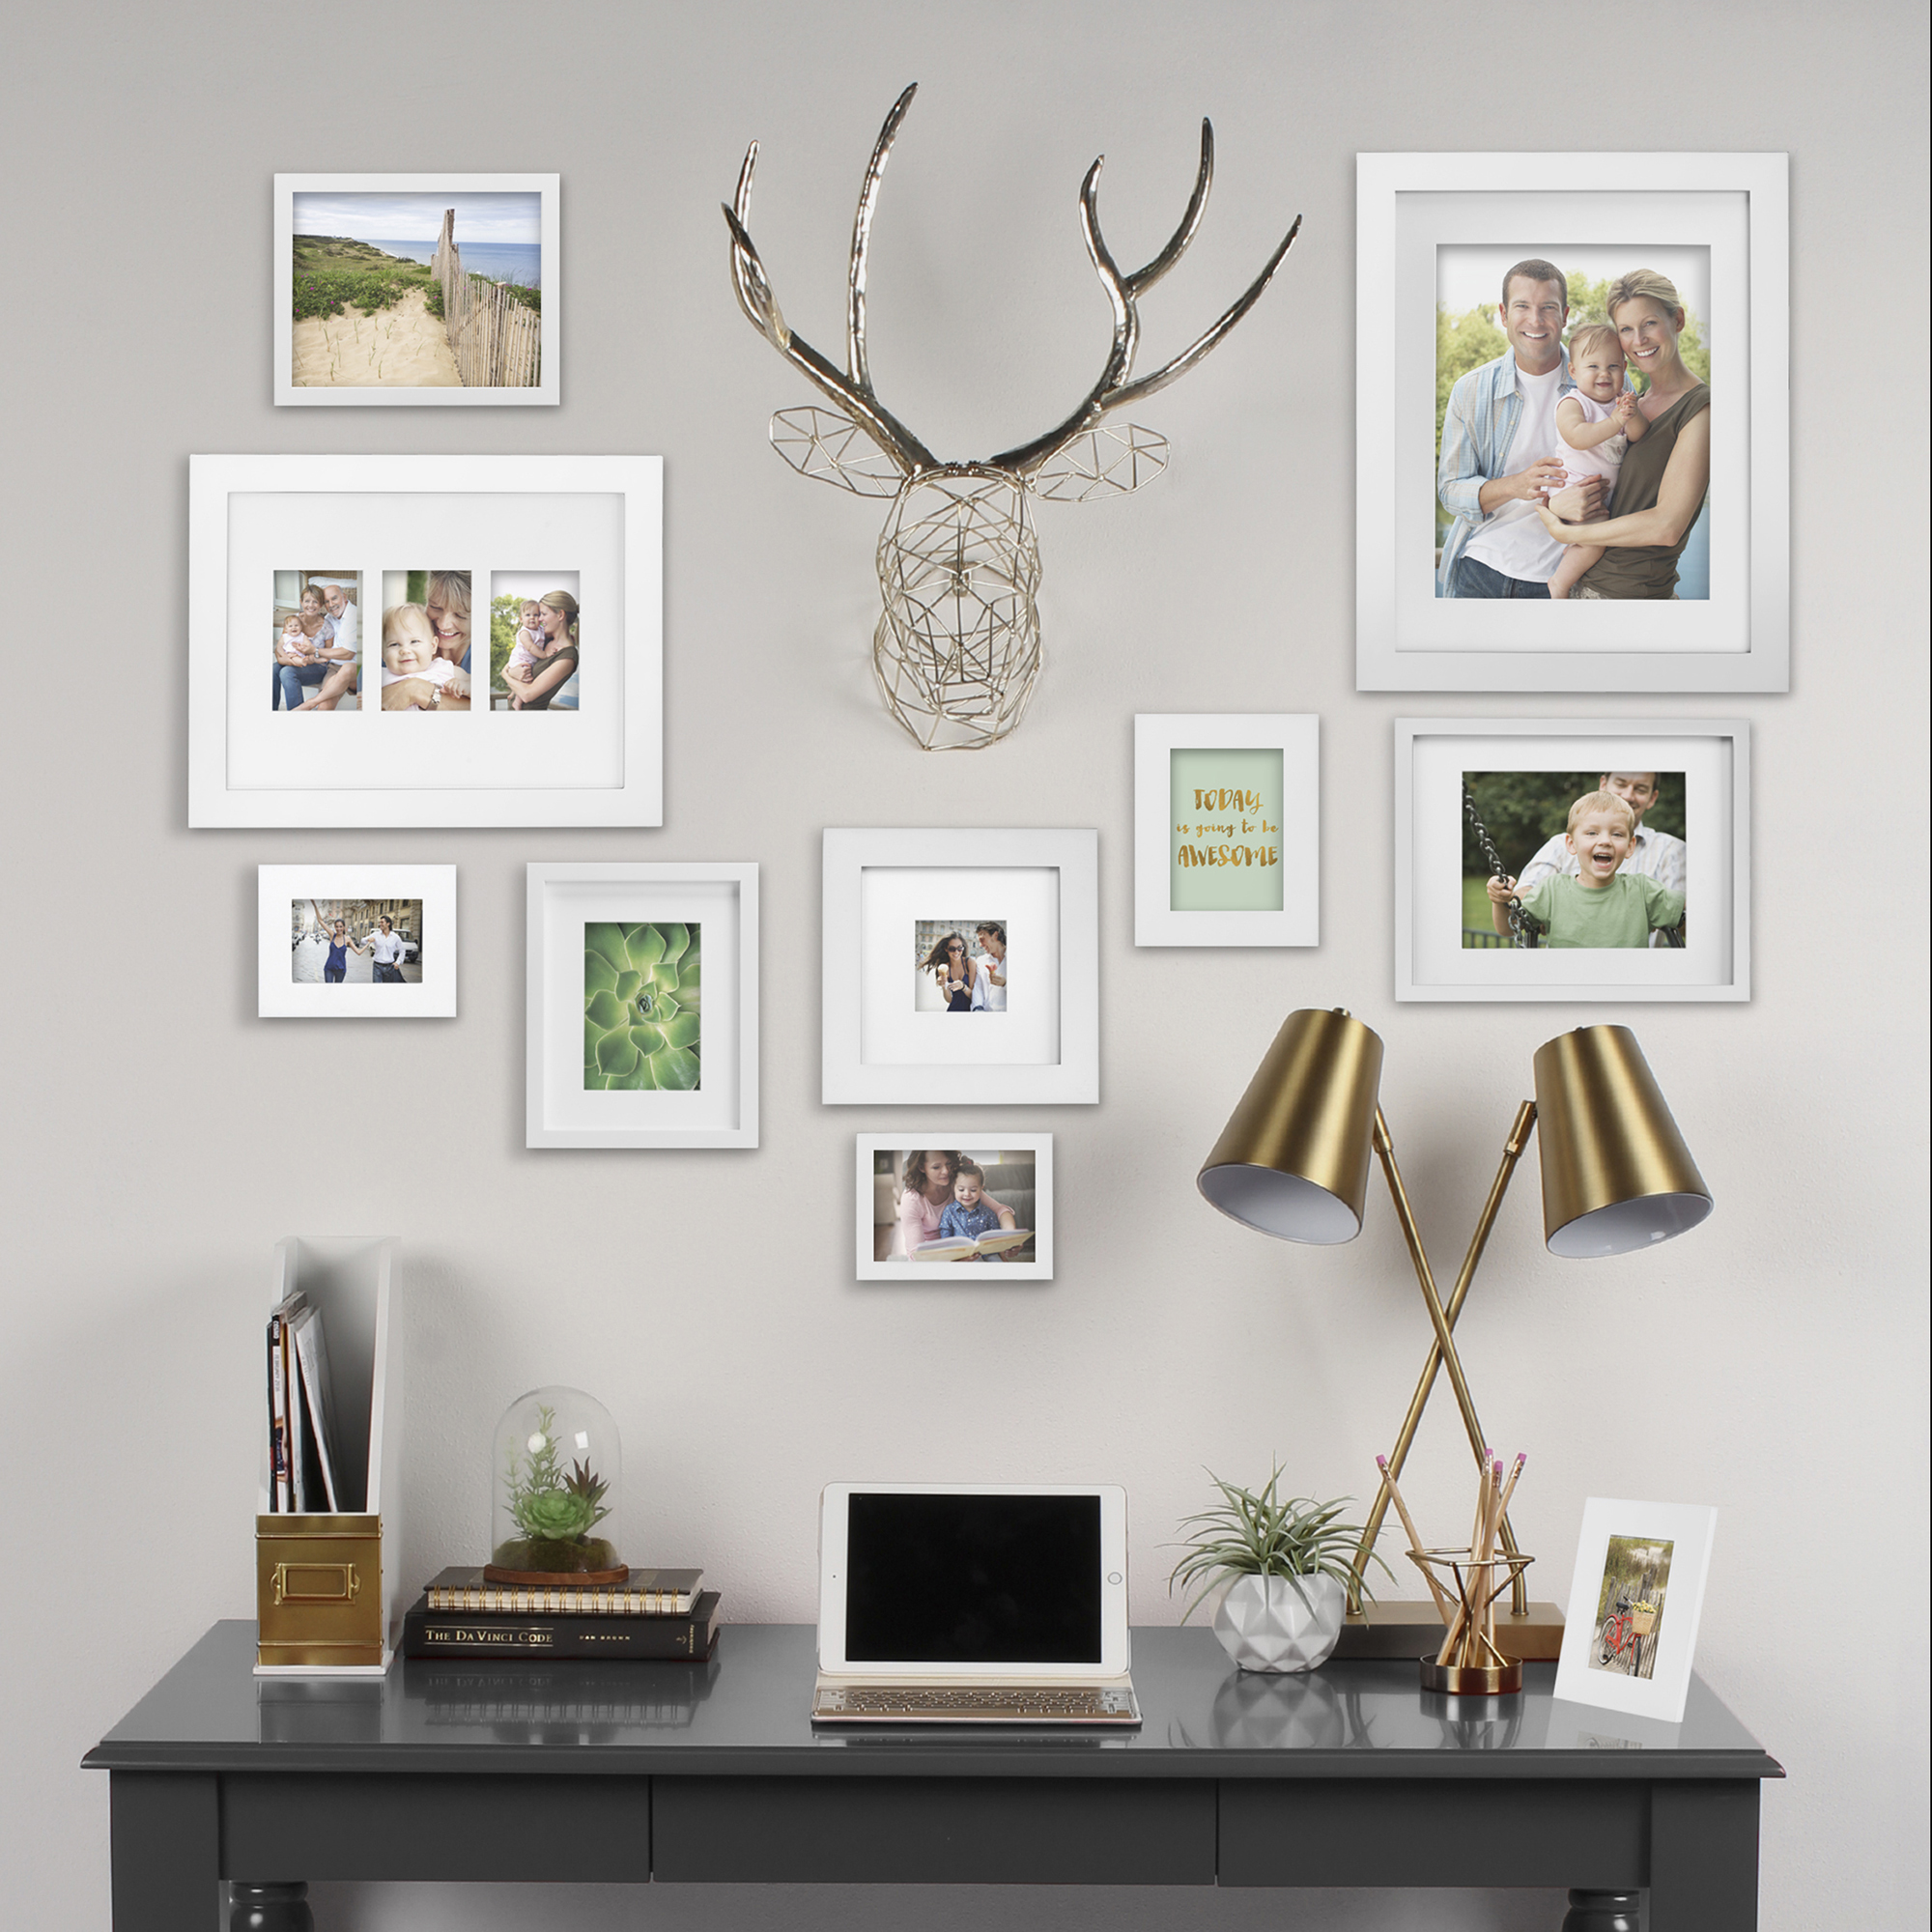 Better Homes & Gardens Gallery 11" x 14" Without Mat for 8" x 10", Wall Picture Frame, White - image 2 of 5